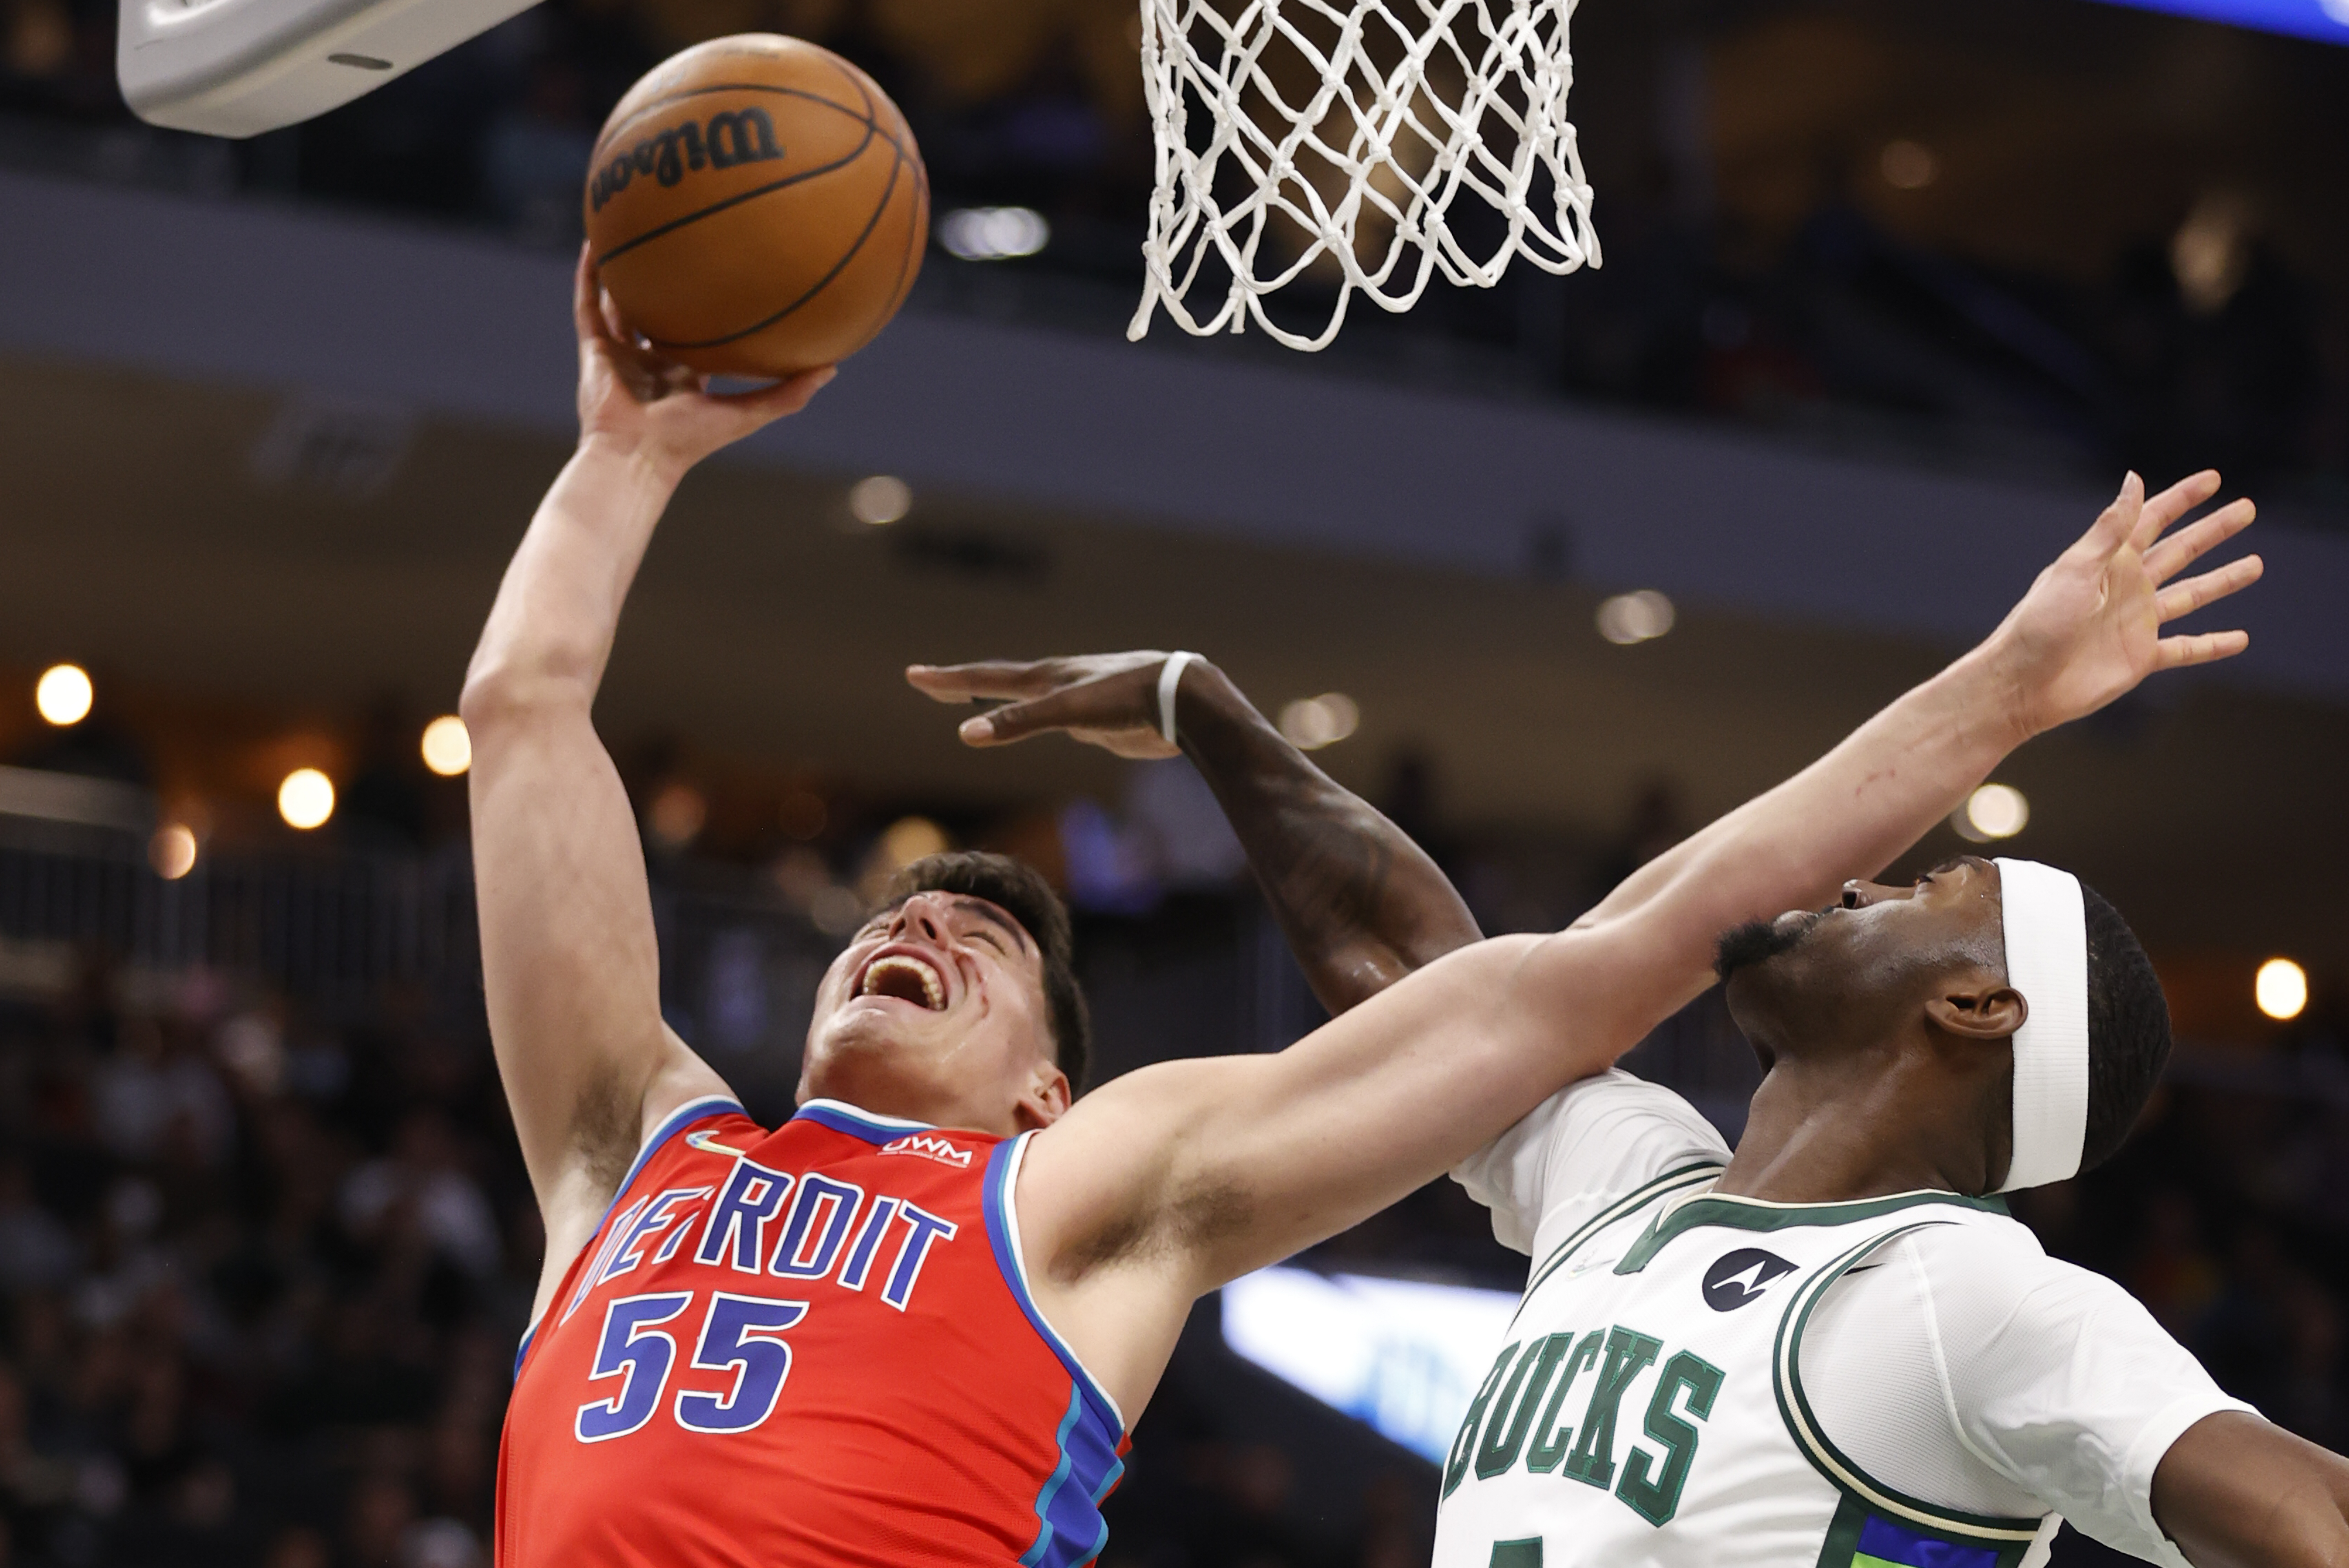 Detroit Pistons vs. Los Angeles Clippers - NBA (11/26/21) - How to Watch, Start Time - mlive.com